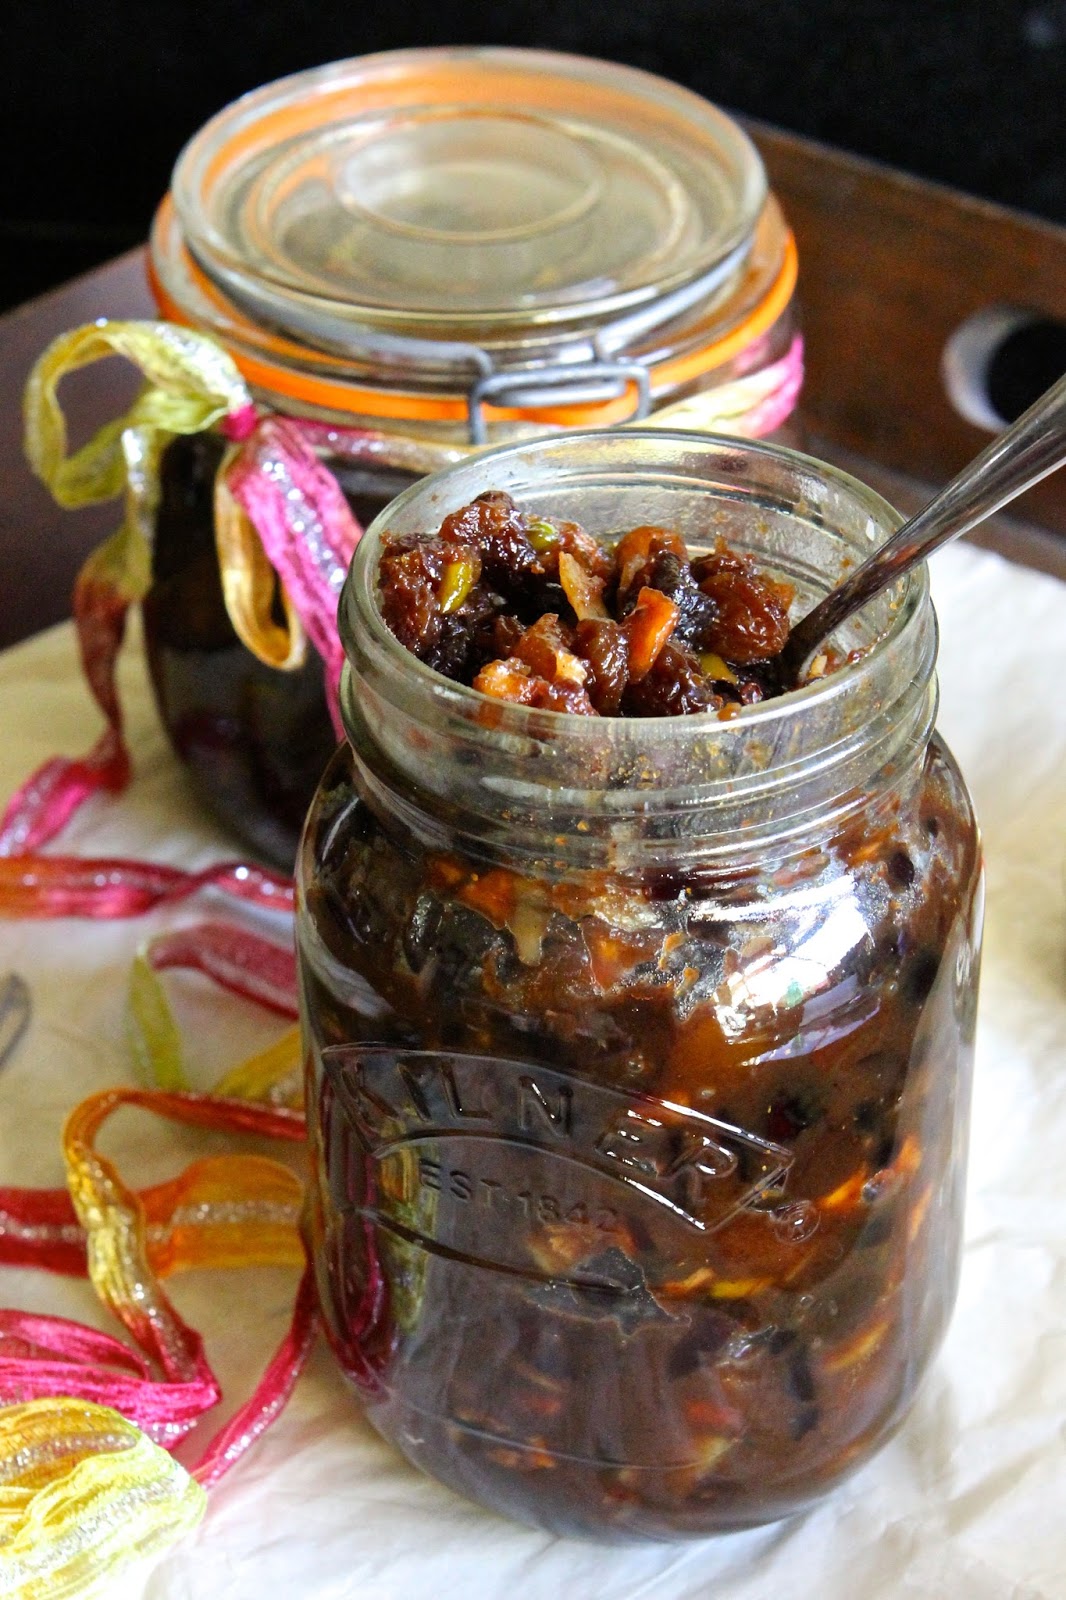 Gluten Free Alchemist: Extra Fruity Mincemeat with Pistachio and Calvados